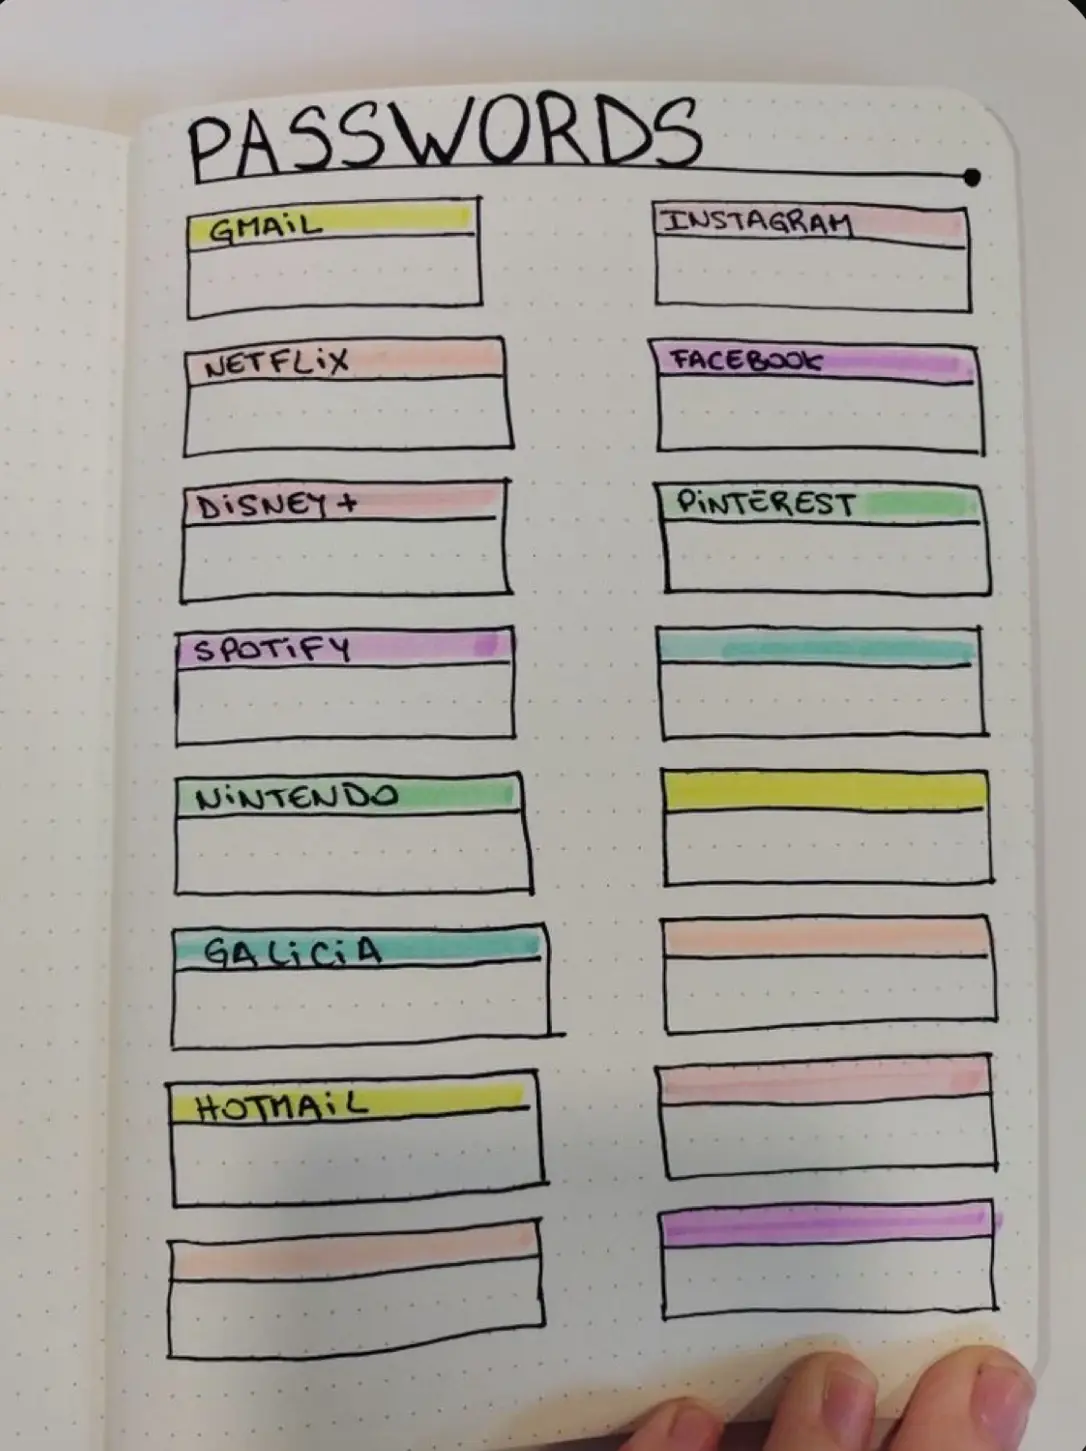 17 Pretty Bullet Journal Daily Layouts to Inspire You - Clementine